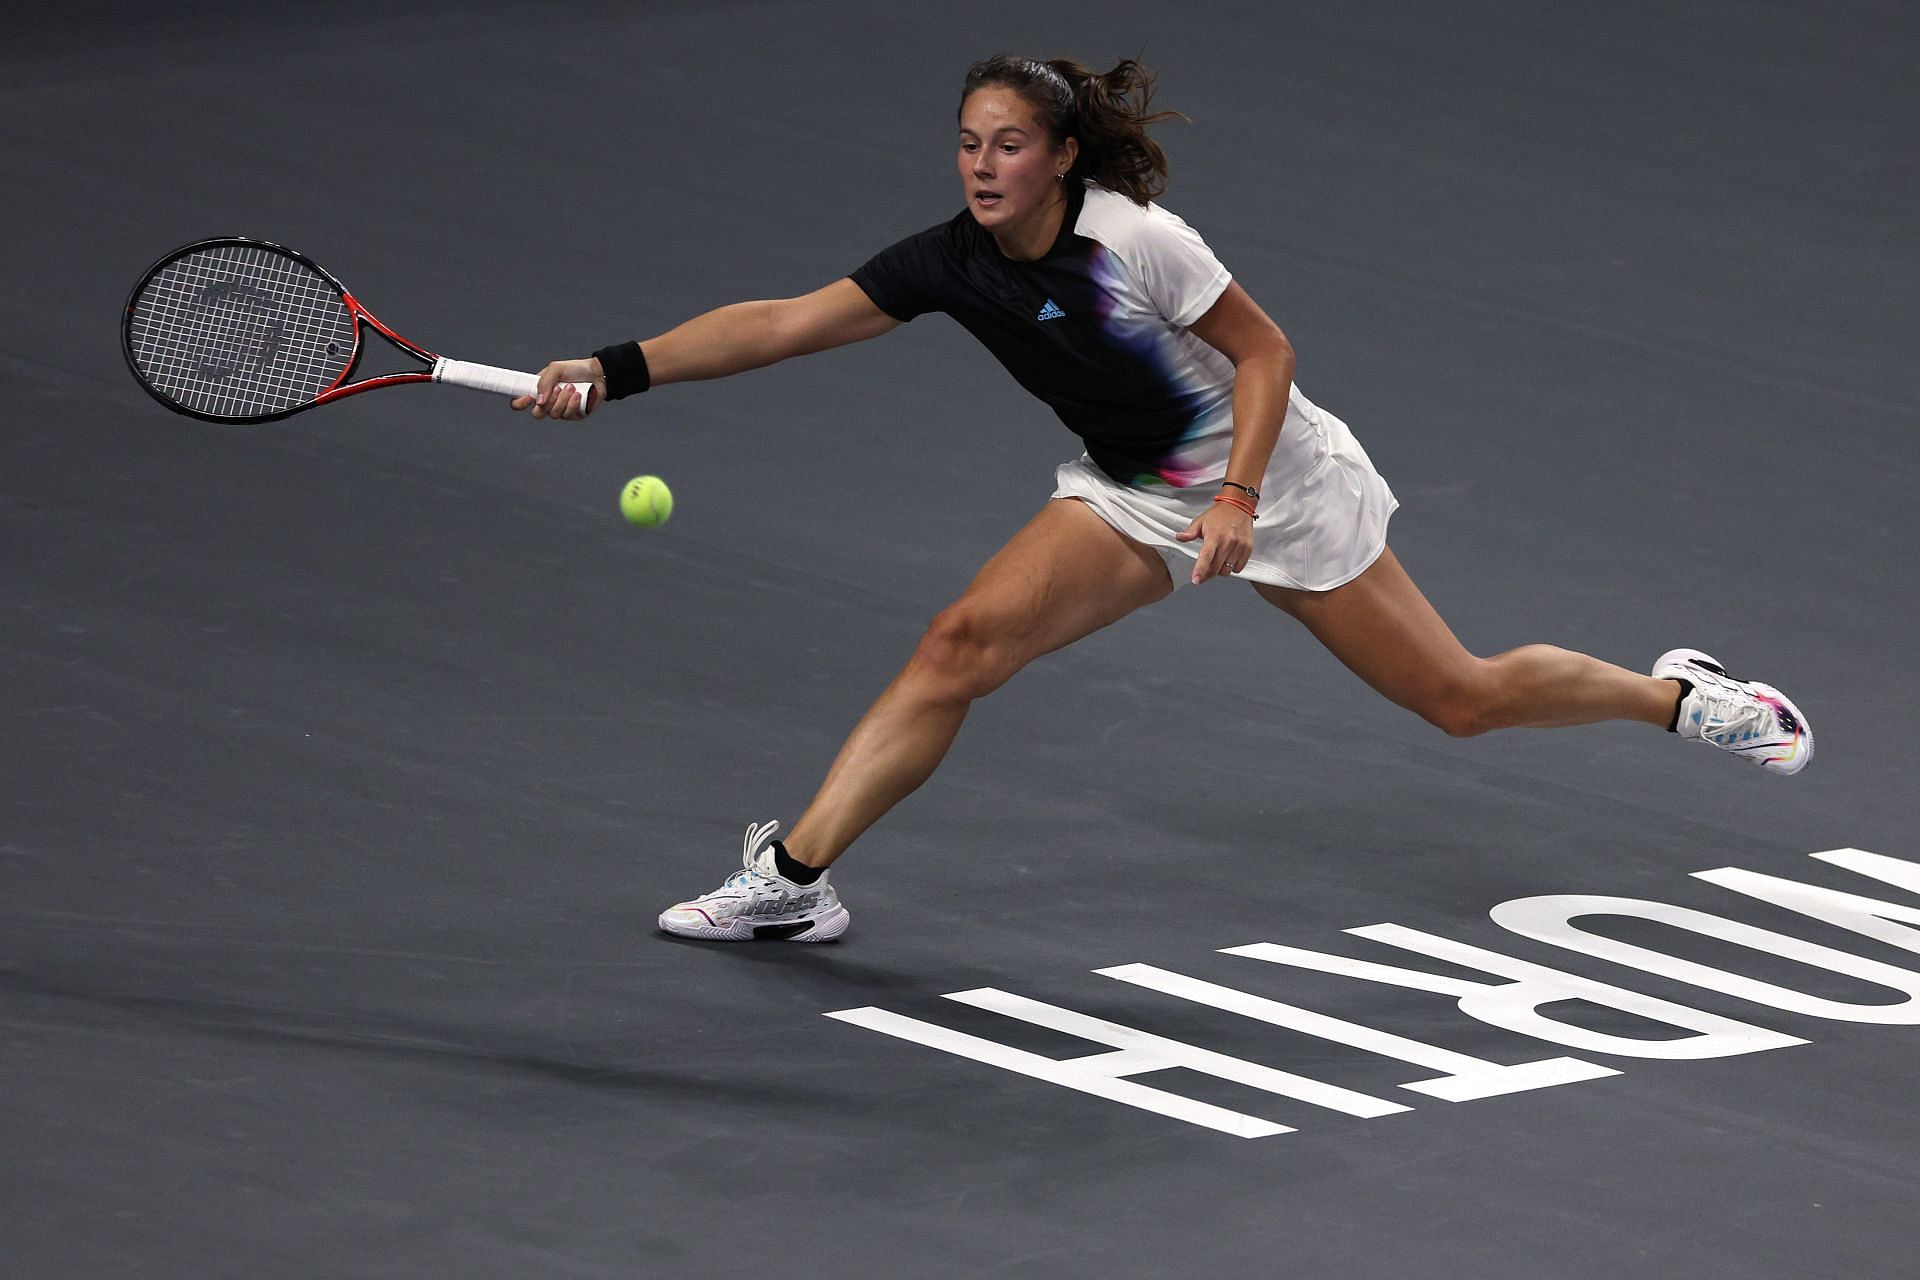 Daria Kasatkina rushes to the ball during her group stage match against Coco Gauff in the WTA Finals